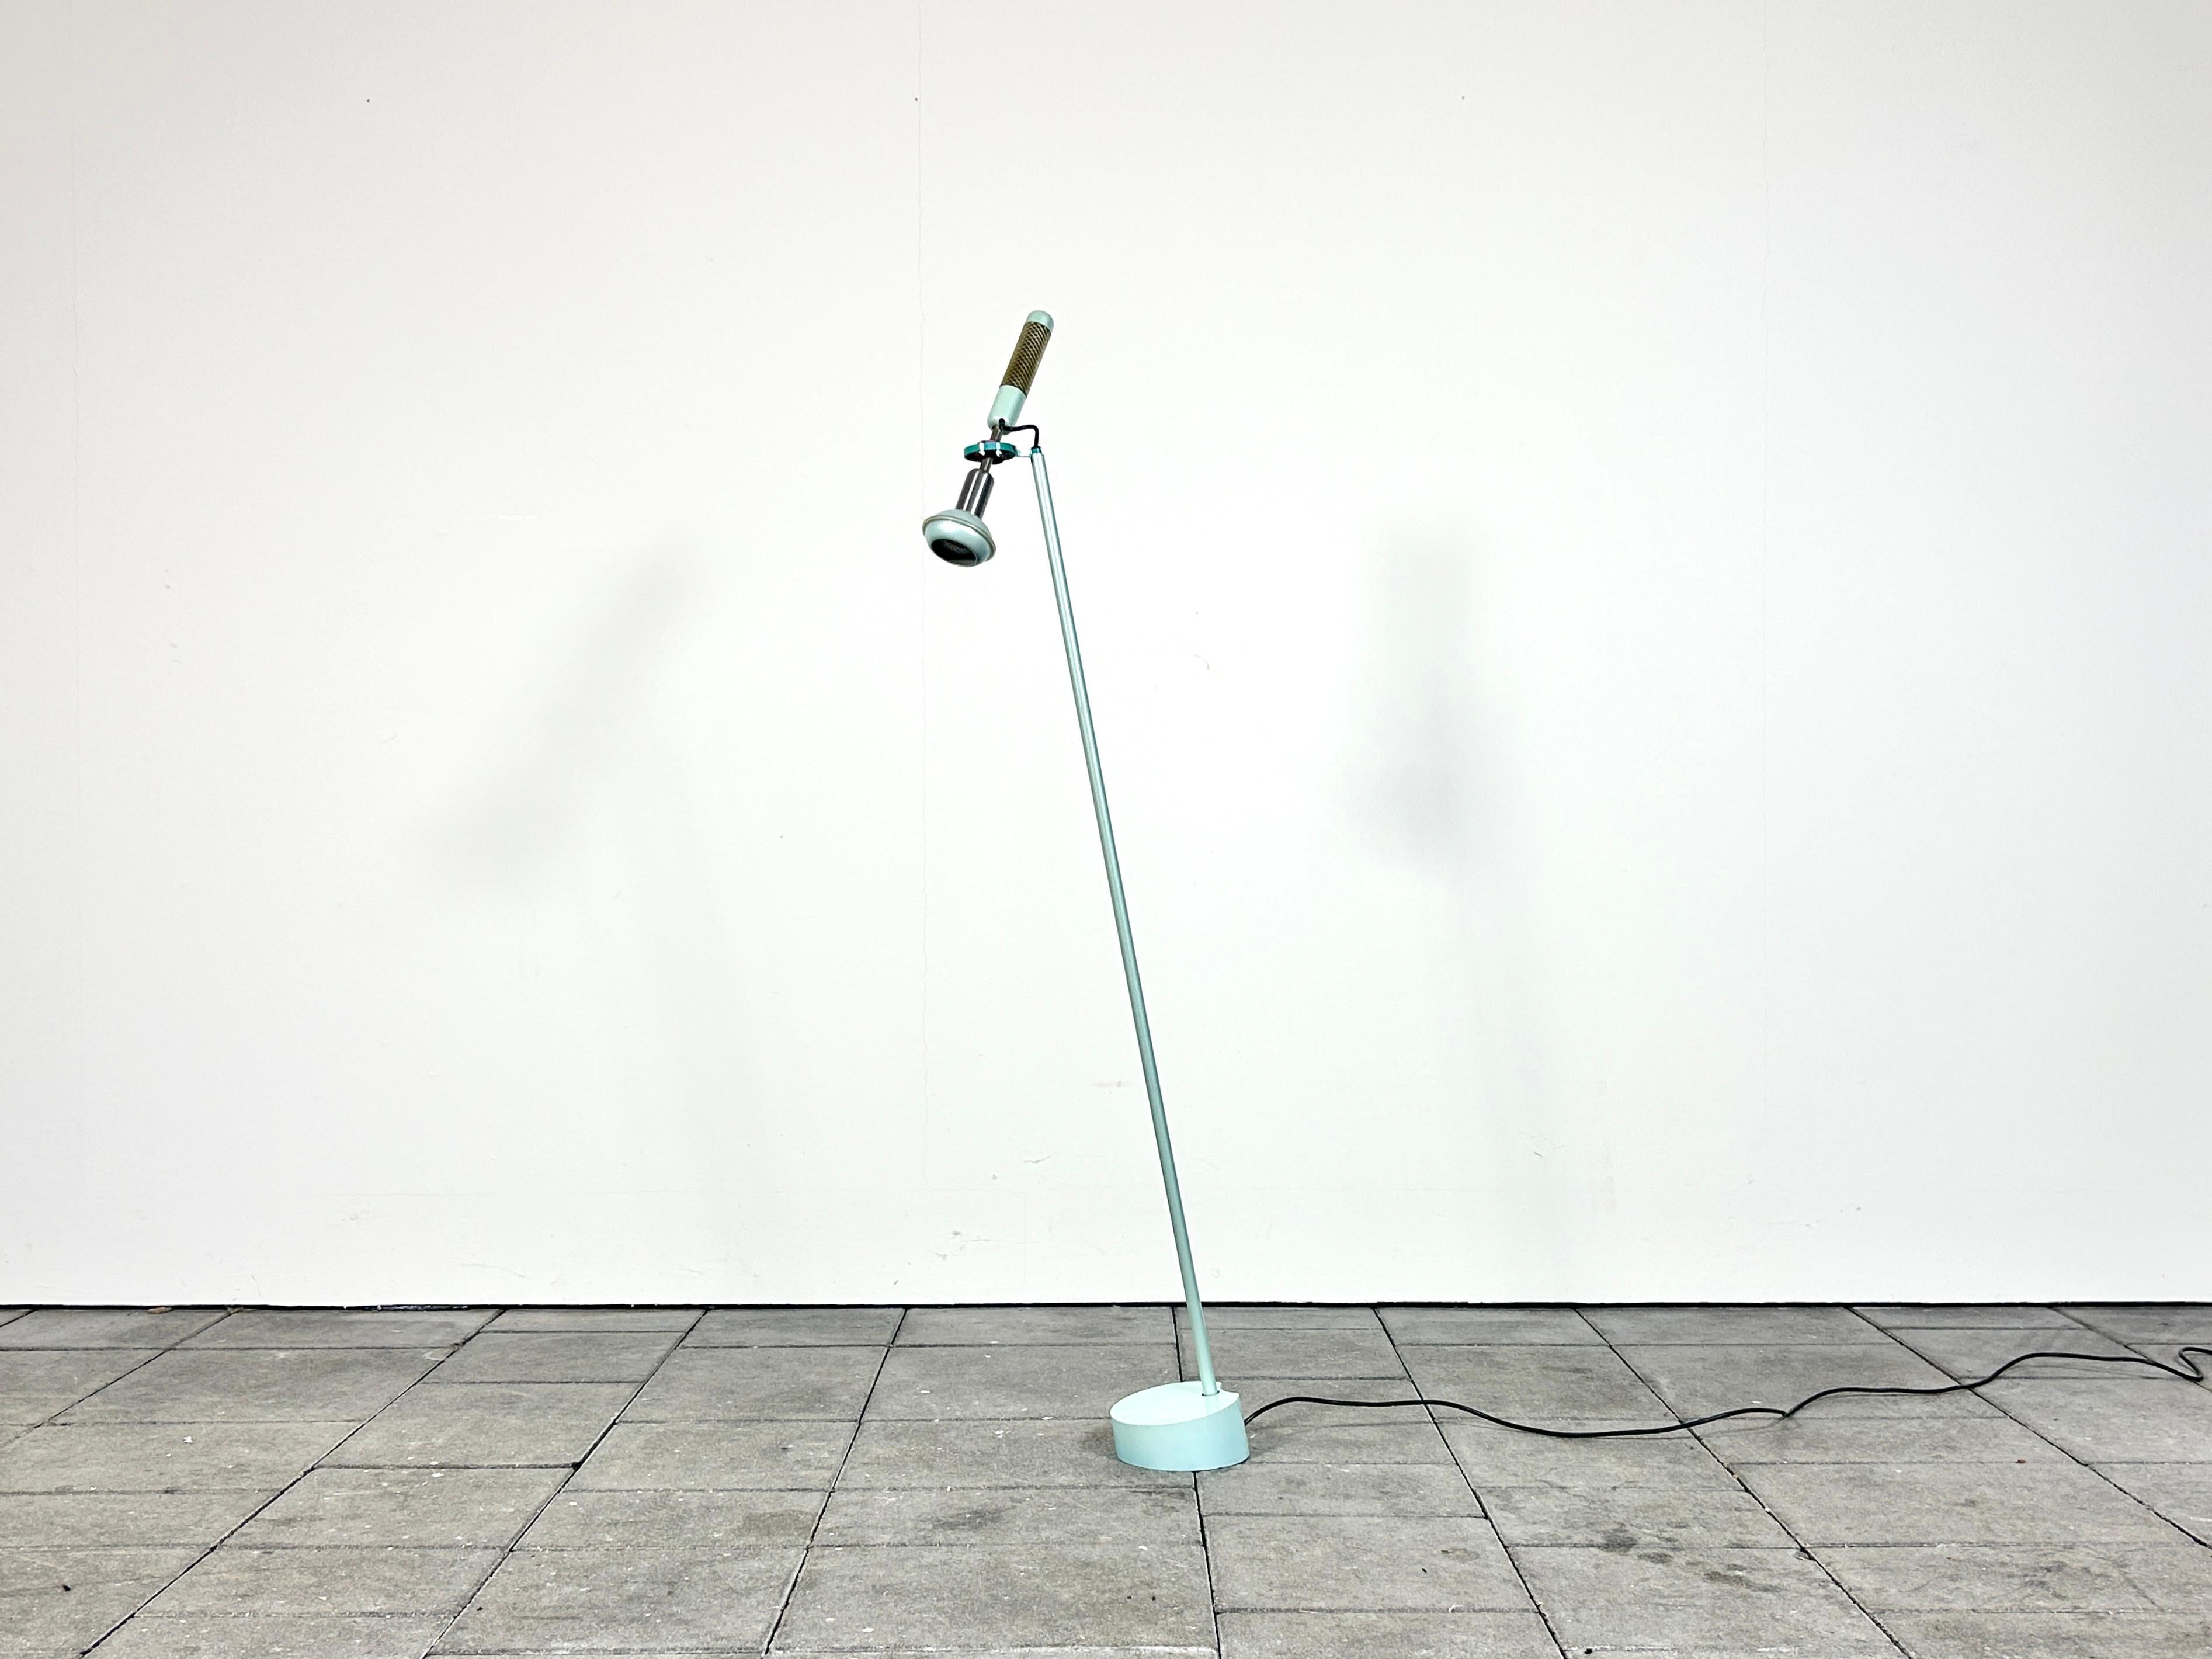 Post-modern Grip floor lamp, designed by Achille Castiglioni, in 1985.

manufactured by Flos, Italy. 

Painted Steel & Aluminum, Plastic. With makers bedge.

The lamp creates a spot light and is perfectly suitable for creating a good atmosphere to